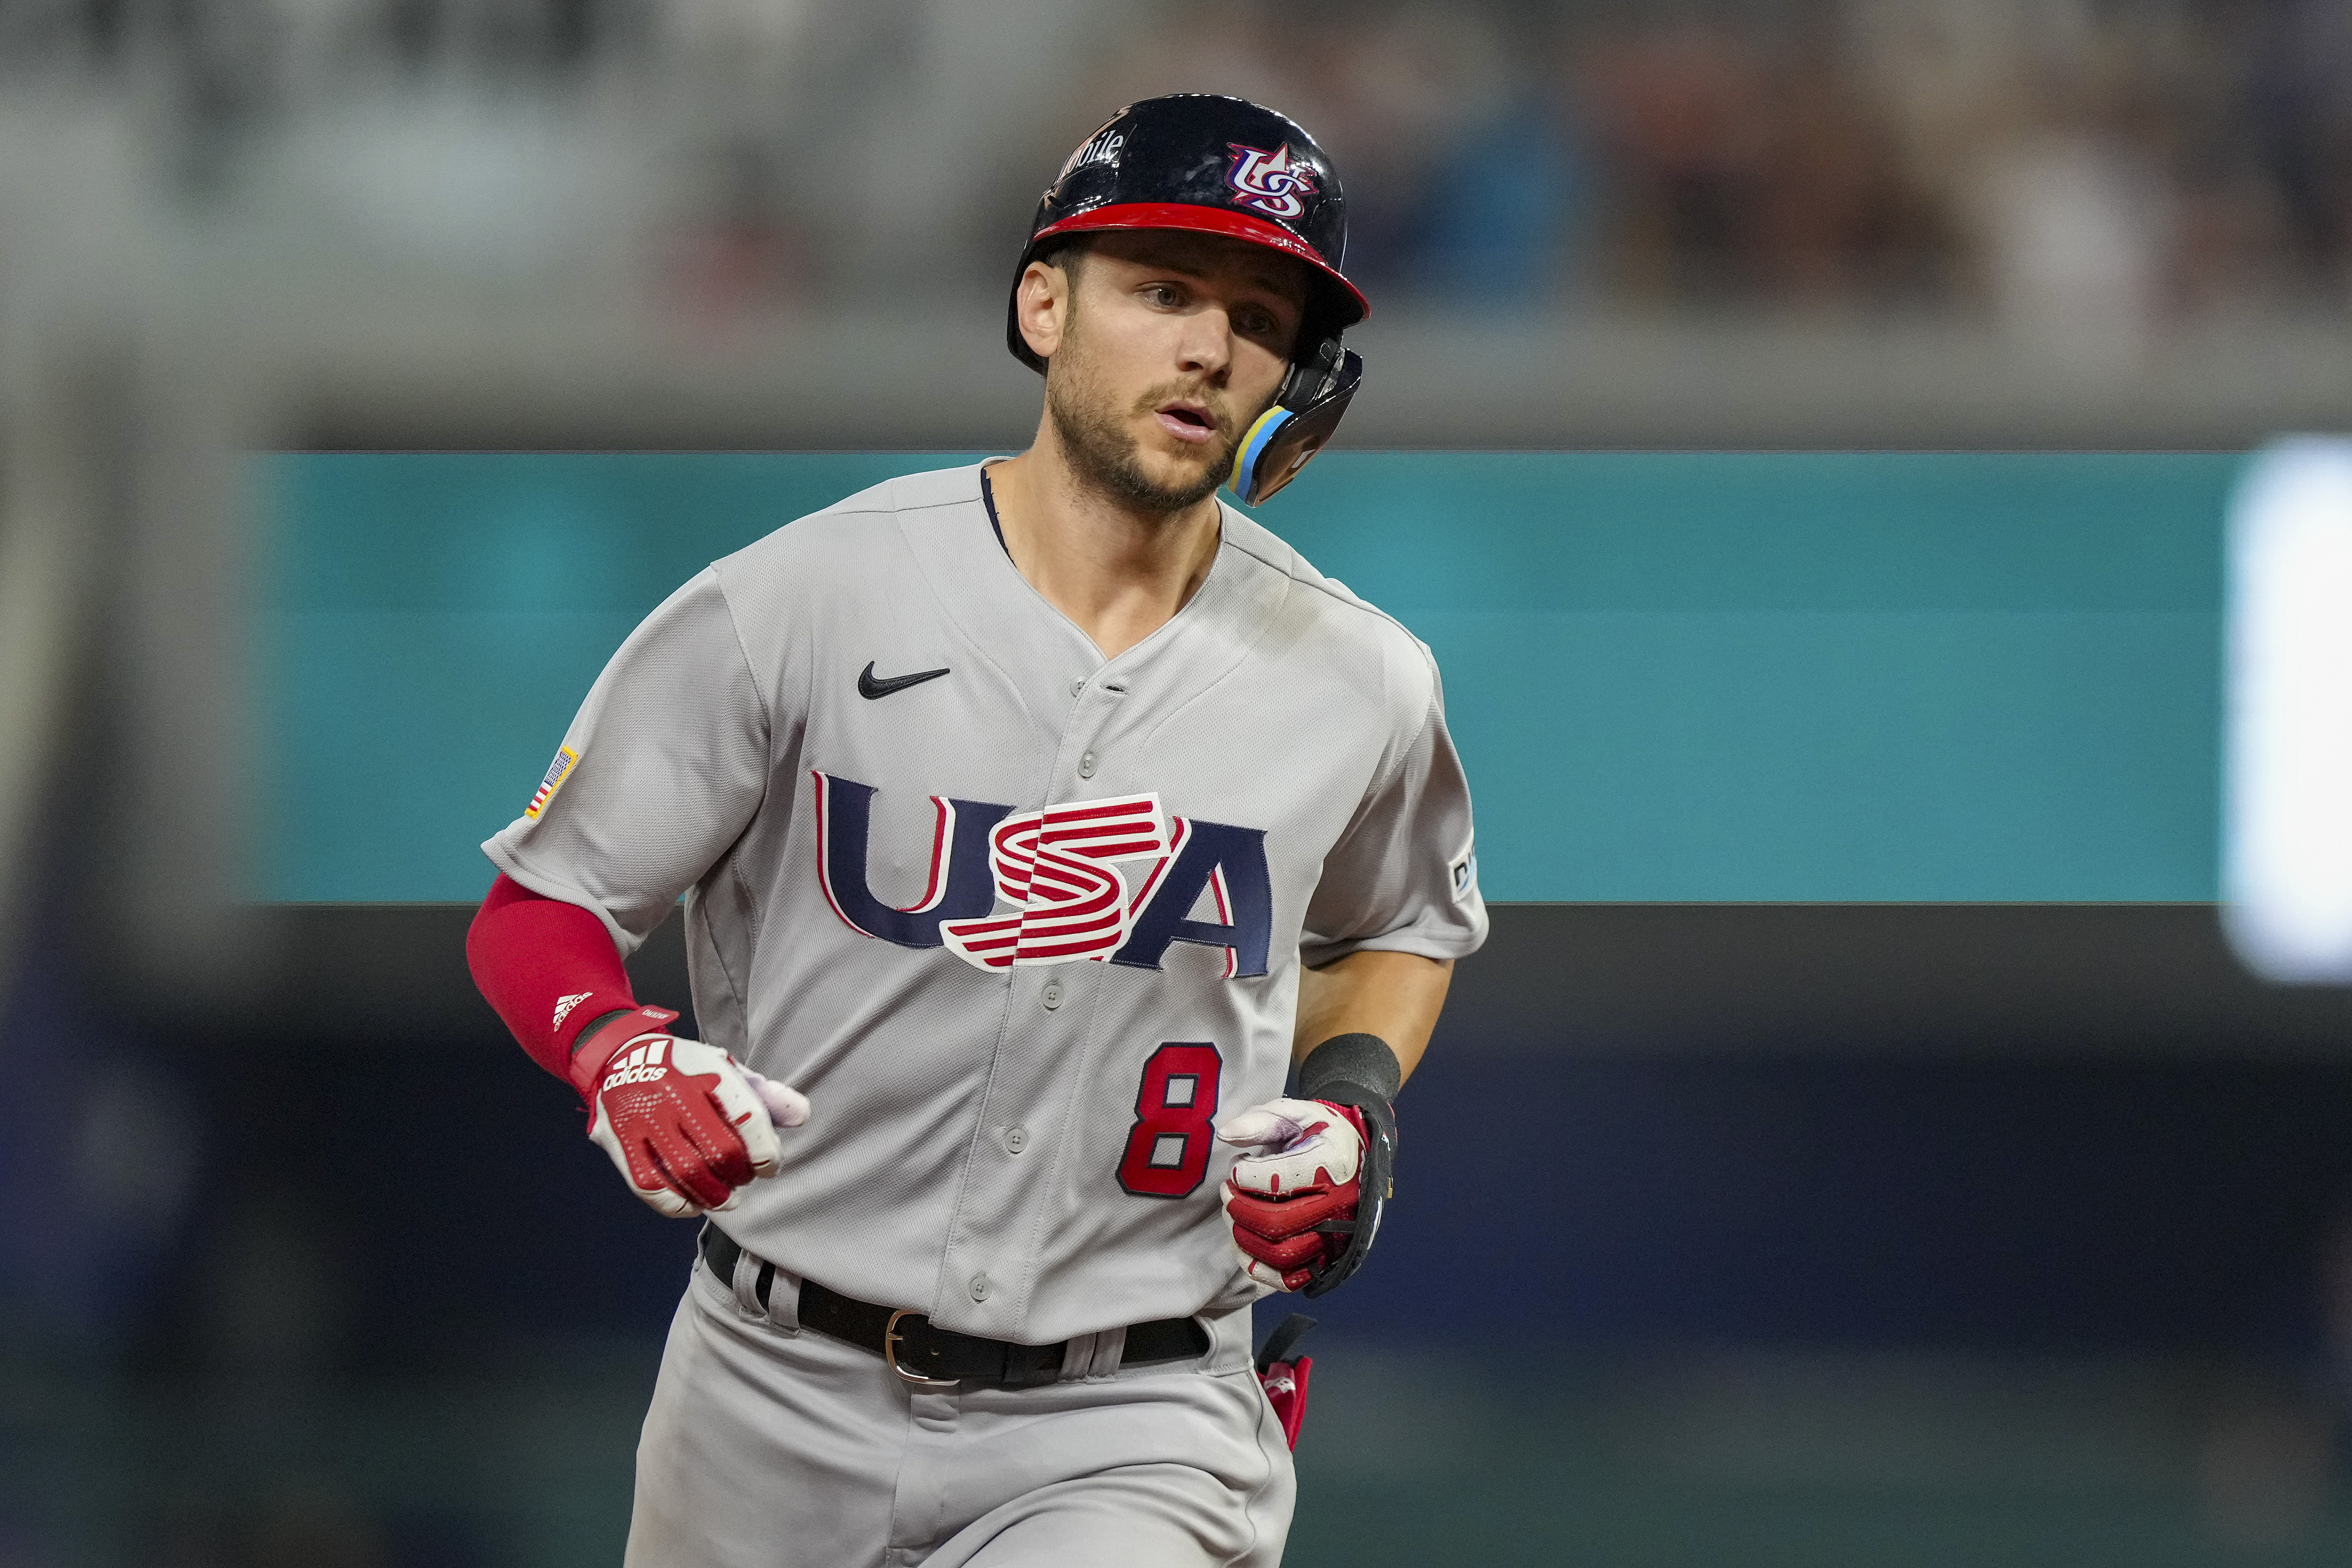 Trea Turner #8 of The United States rounds the bases after hitting a grand slam during the eighth inning of a 2023 World Baseball Classic Quarterfinal game against The United States at loanDepot park on March 18, 2023 in Miami, Florida.